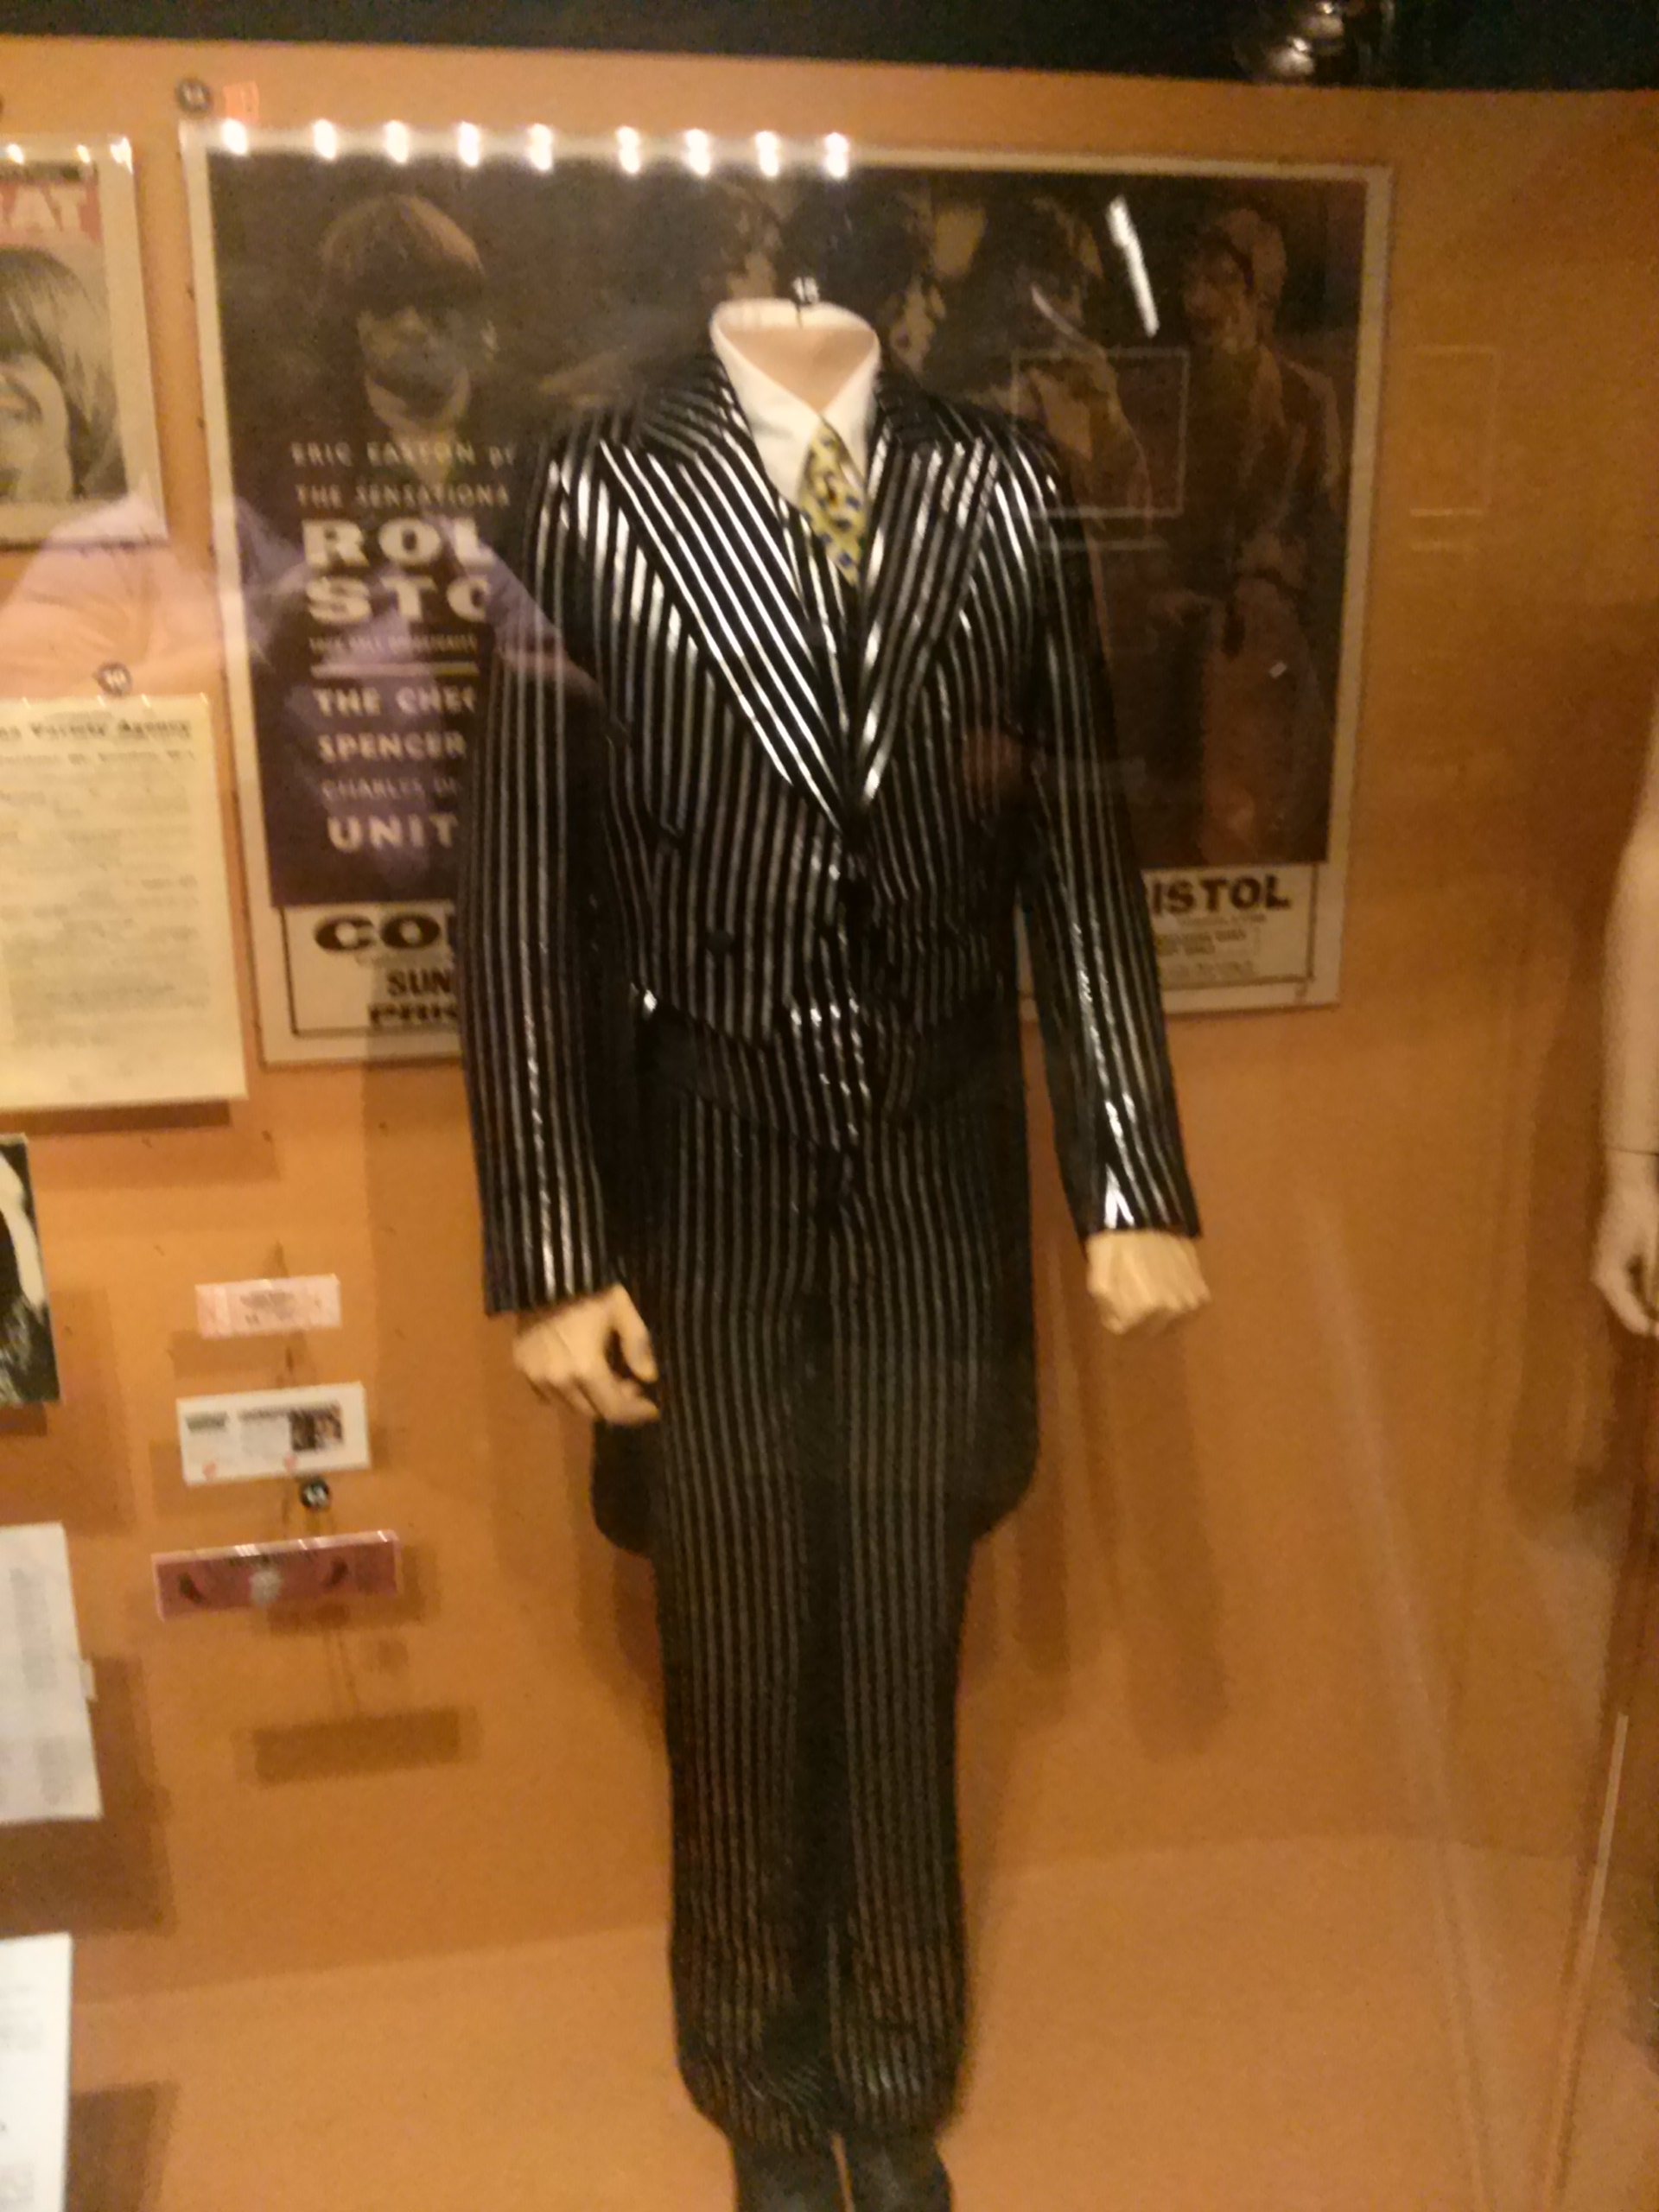 Photograph: The Rolling Stones exhibit with a headless mannequin with black and silver striped pants suit jacket with white shirt underneath jacket and a yellow tie with black spots. Behind mannequin are posters and other Rolling Stones memorabilia.